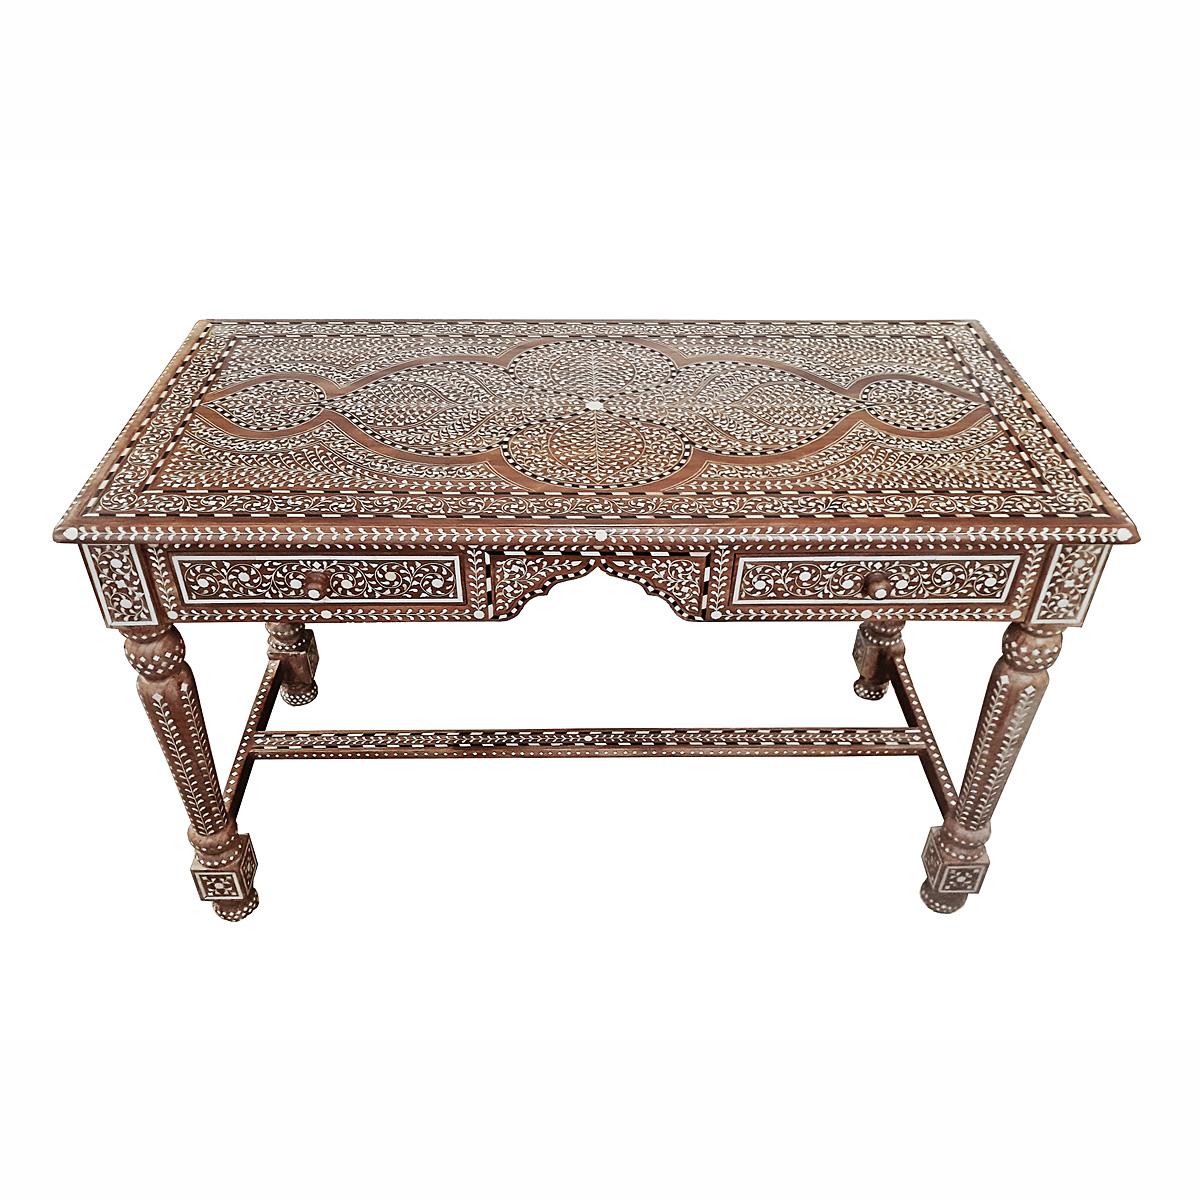 A beautiful writing desk, handcrafted in India out of aged teak wood and cruelty-free sourced animal bone inlays. 

Inlay is ancient decorative technique that involves embedding delicate, hand-carved pieces of bone (in the beginnings it was ivory or